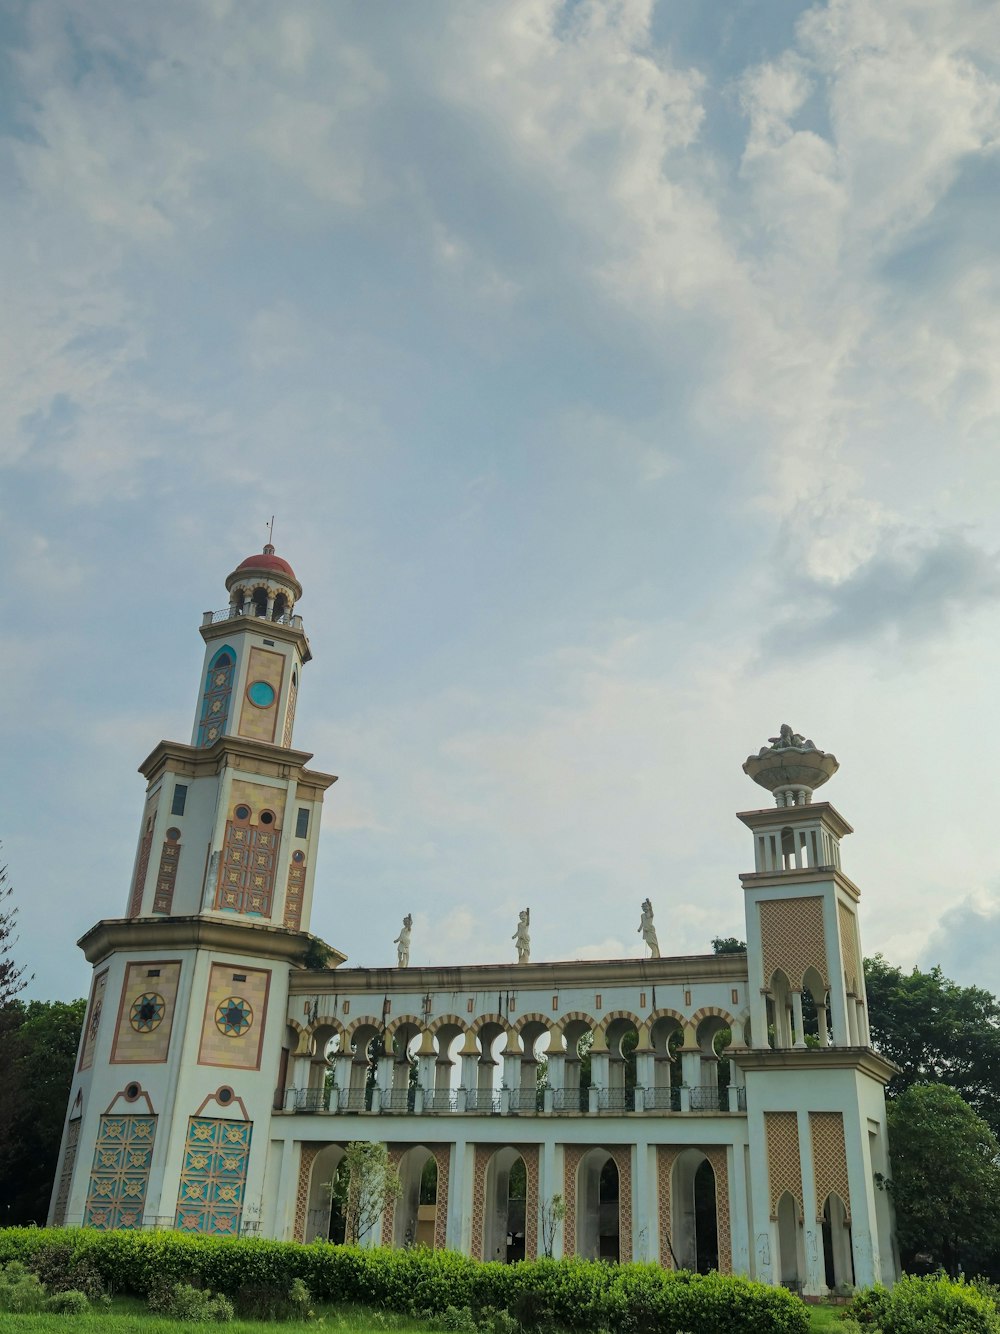 a large building with a clock tower on top of it